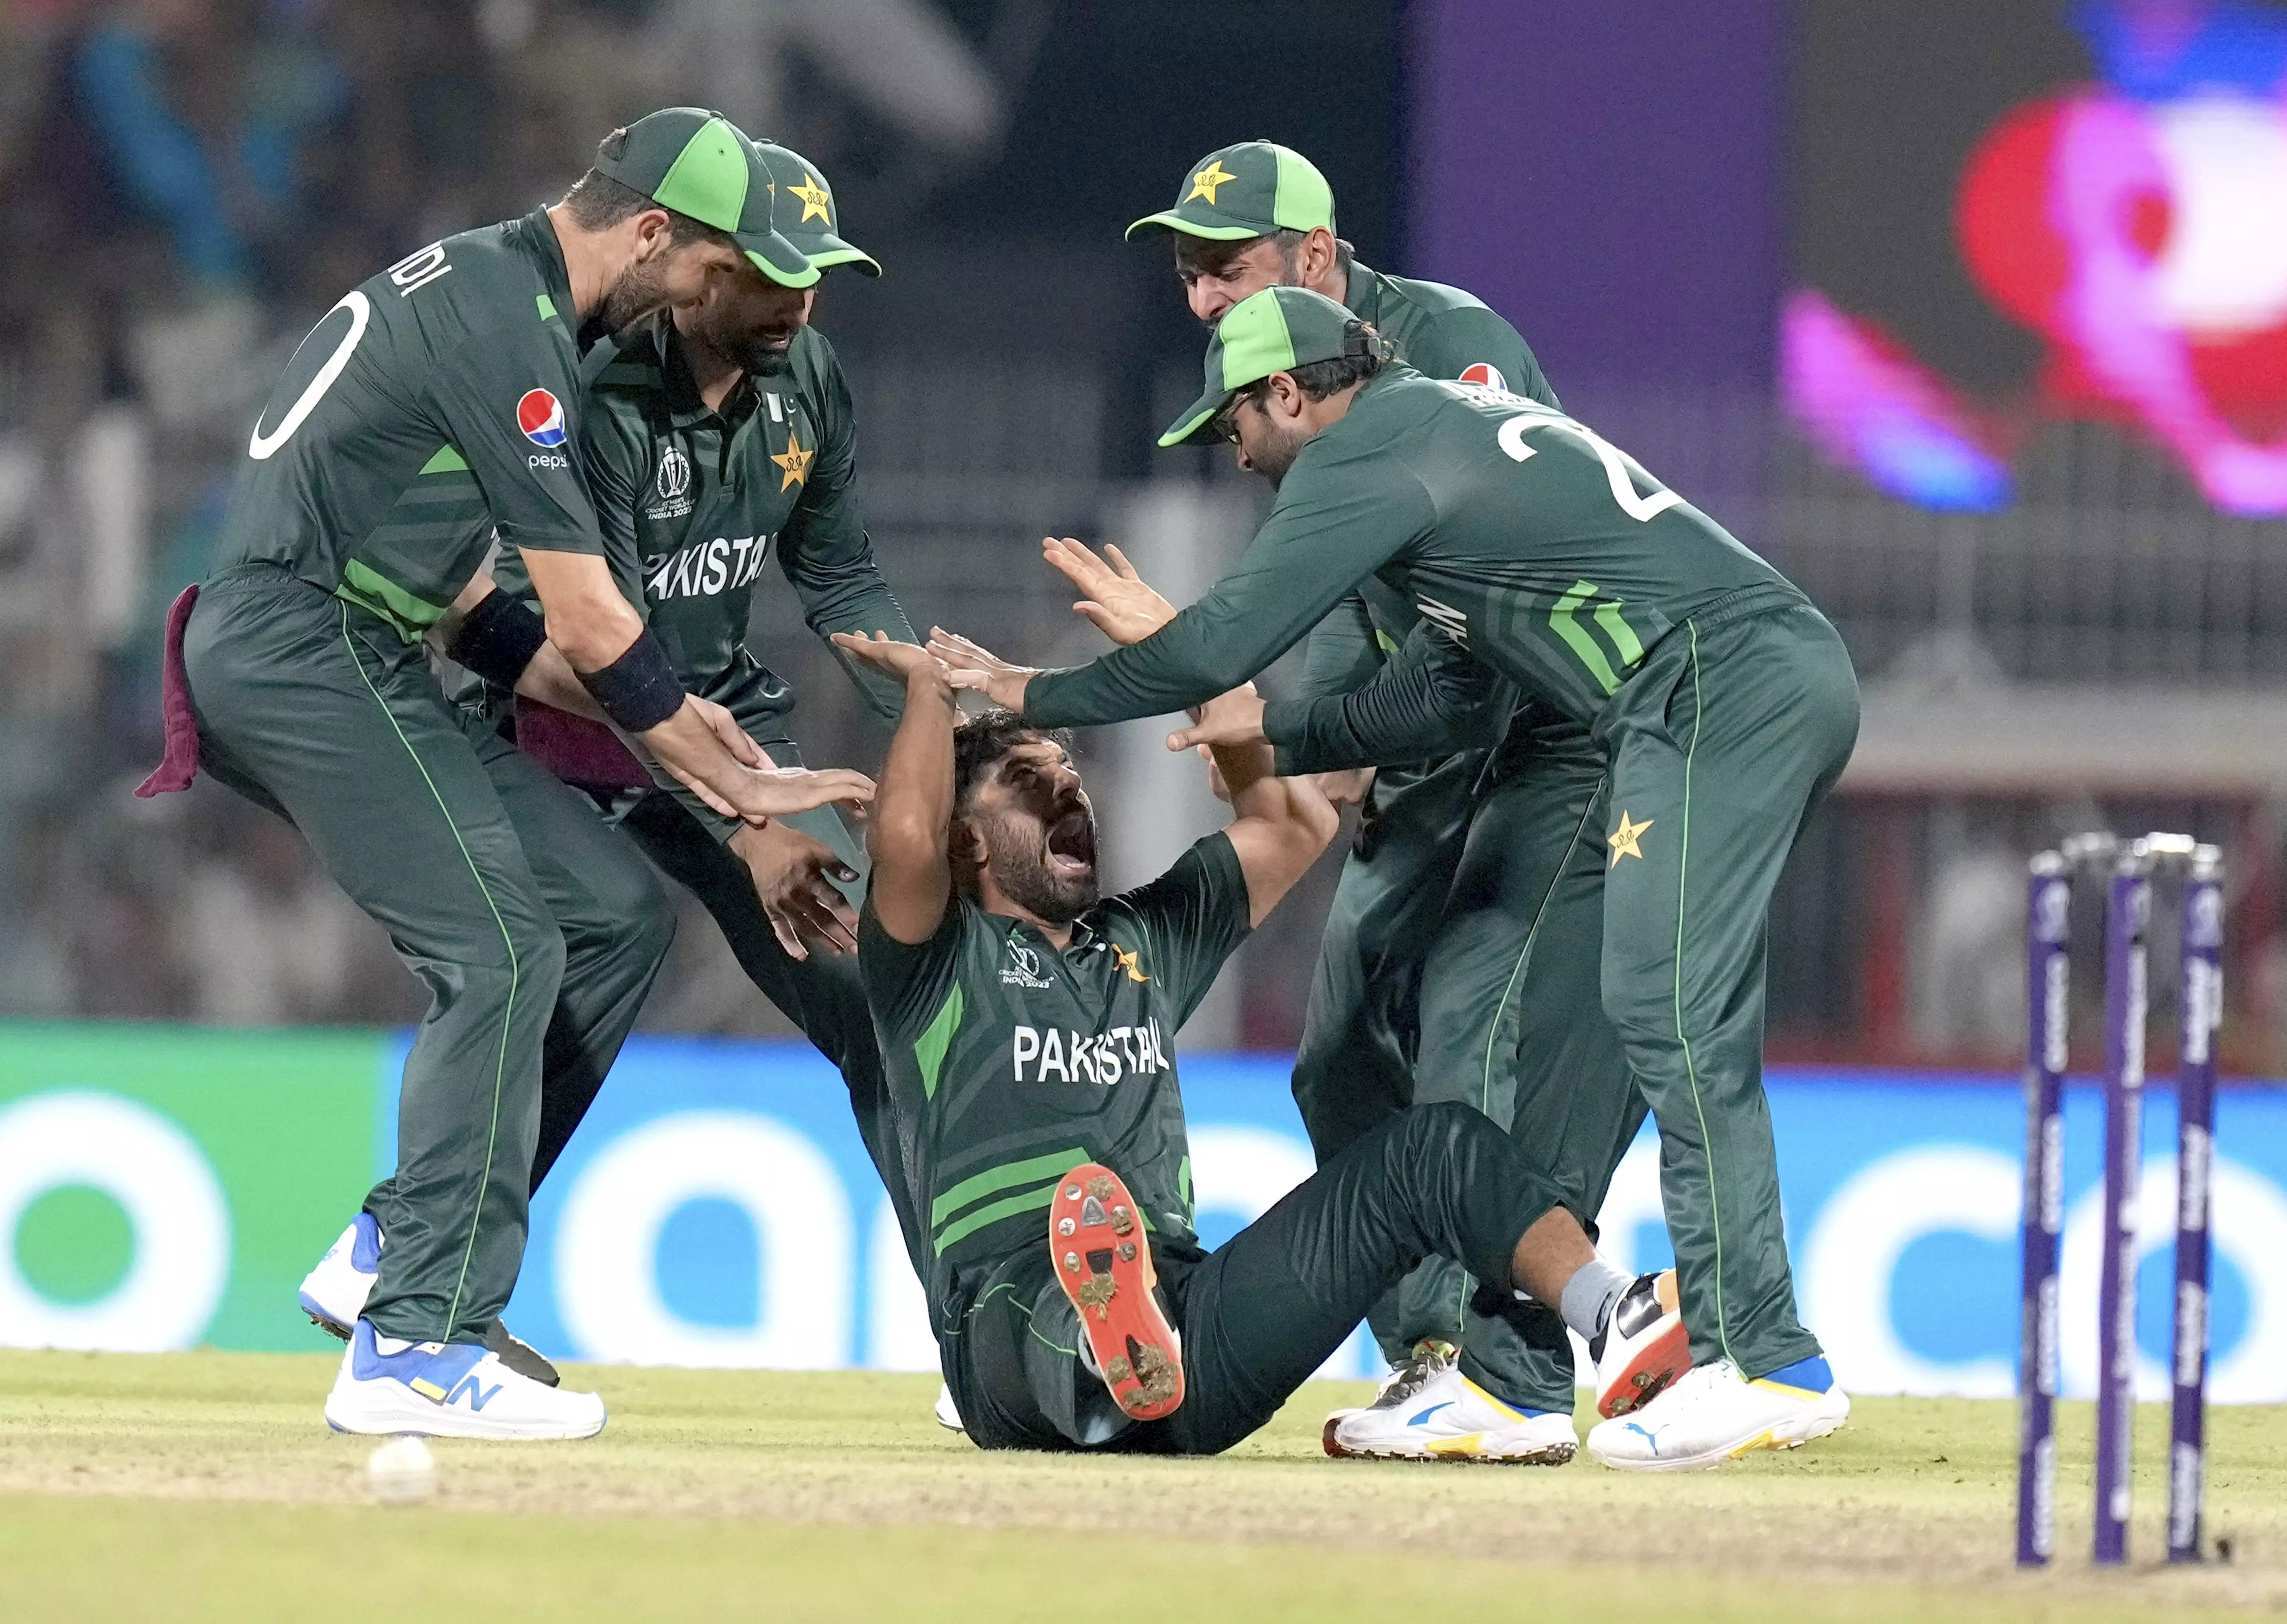 World Cup: Why a Pakistani cricket show is grabbing eyeballs, earning praise in India